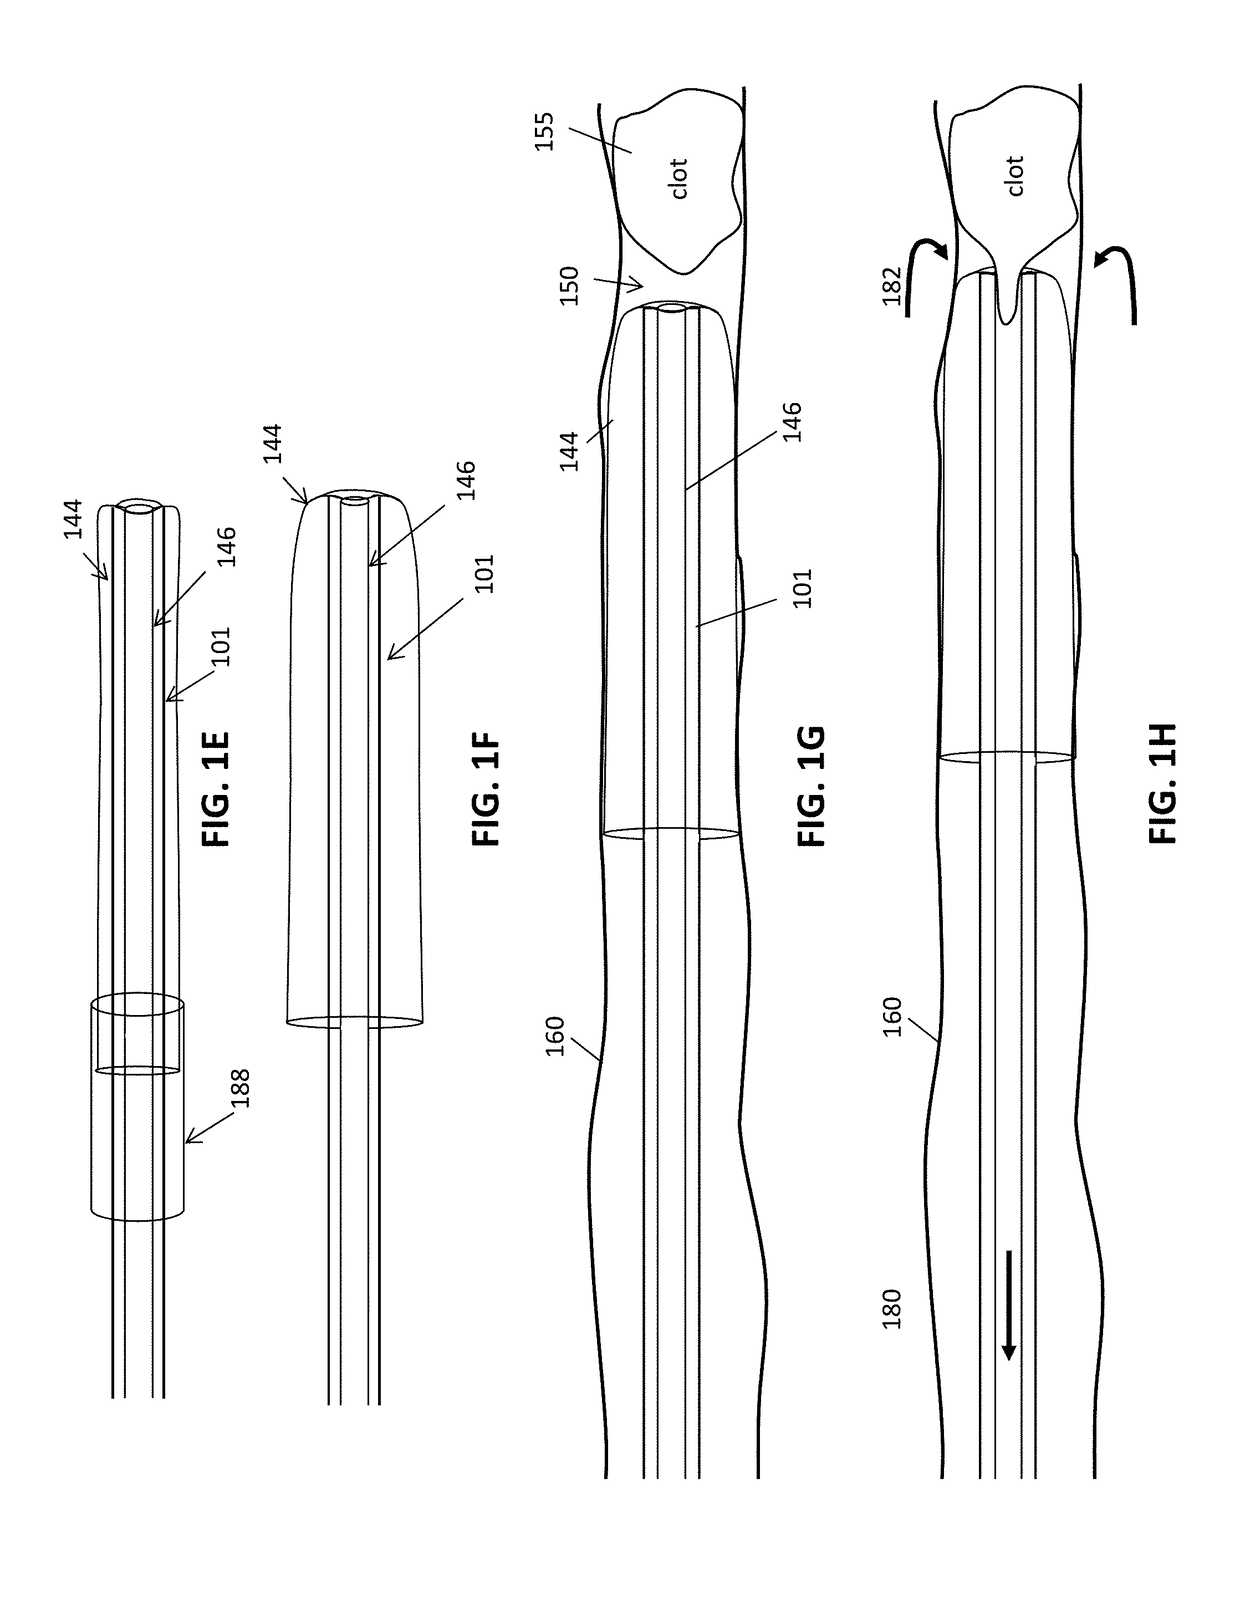 Inverting mechanical thrombectomy apparatuses